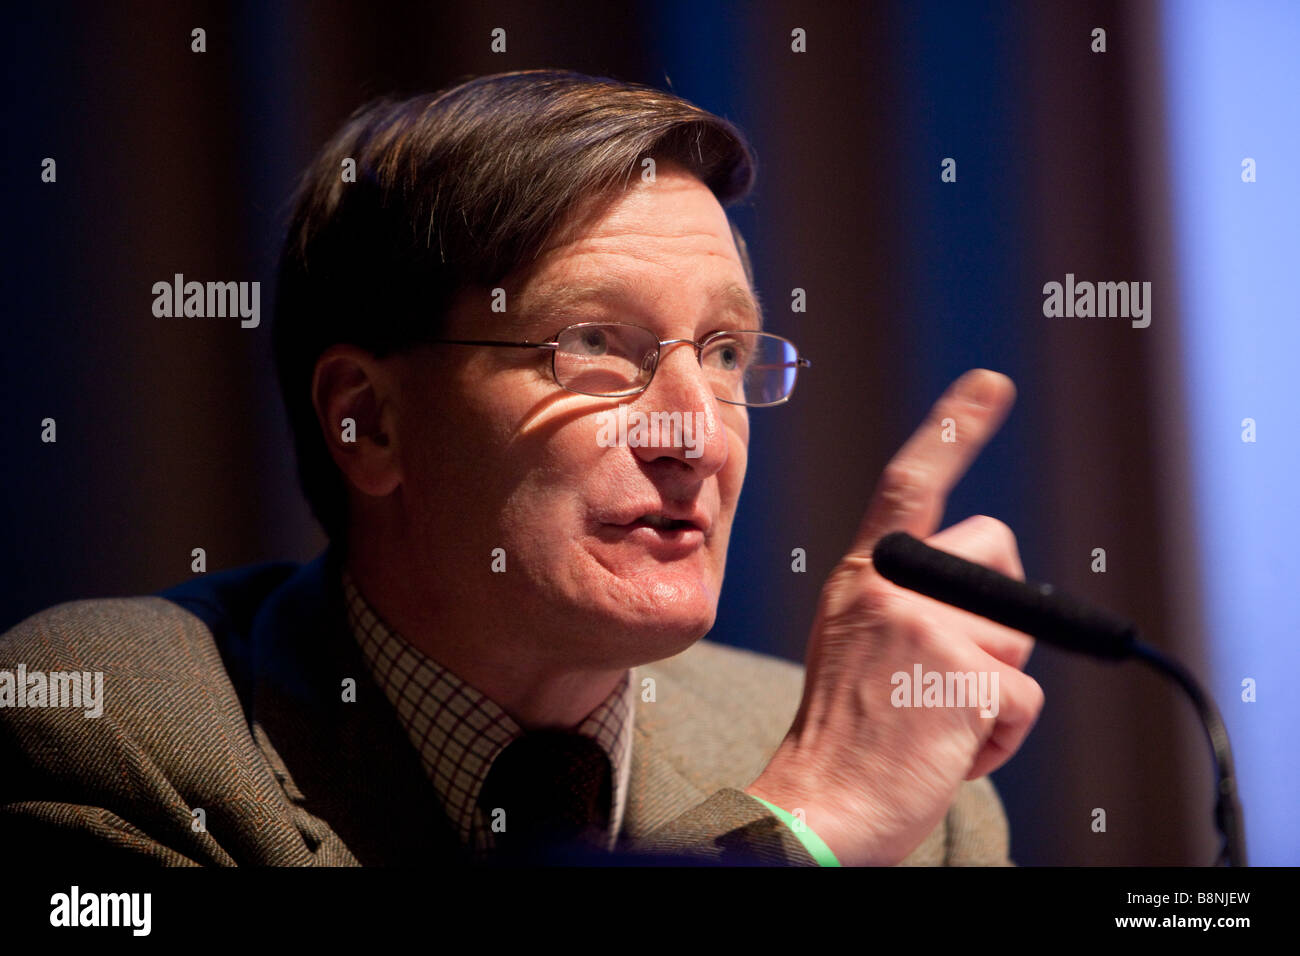 The Convention on Modern Liberty London England 28th February 2009 Dominic Grieve QC MP Shadow Attorney General speaking Stock Photo